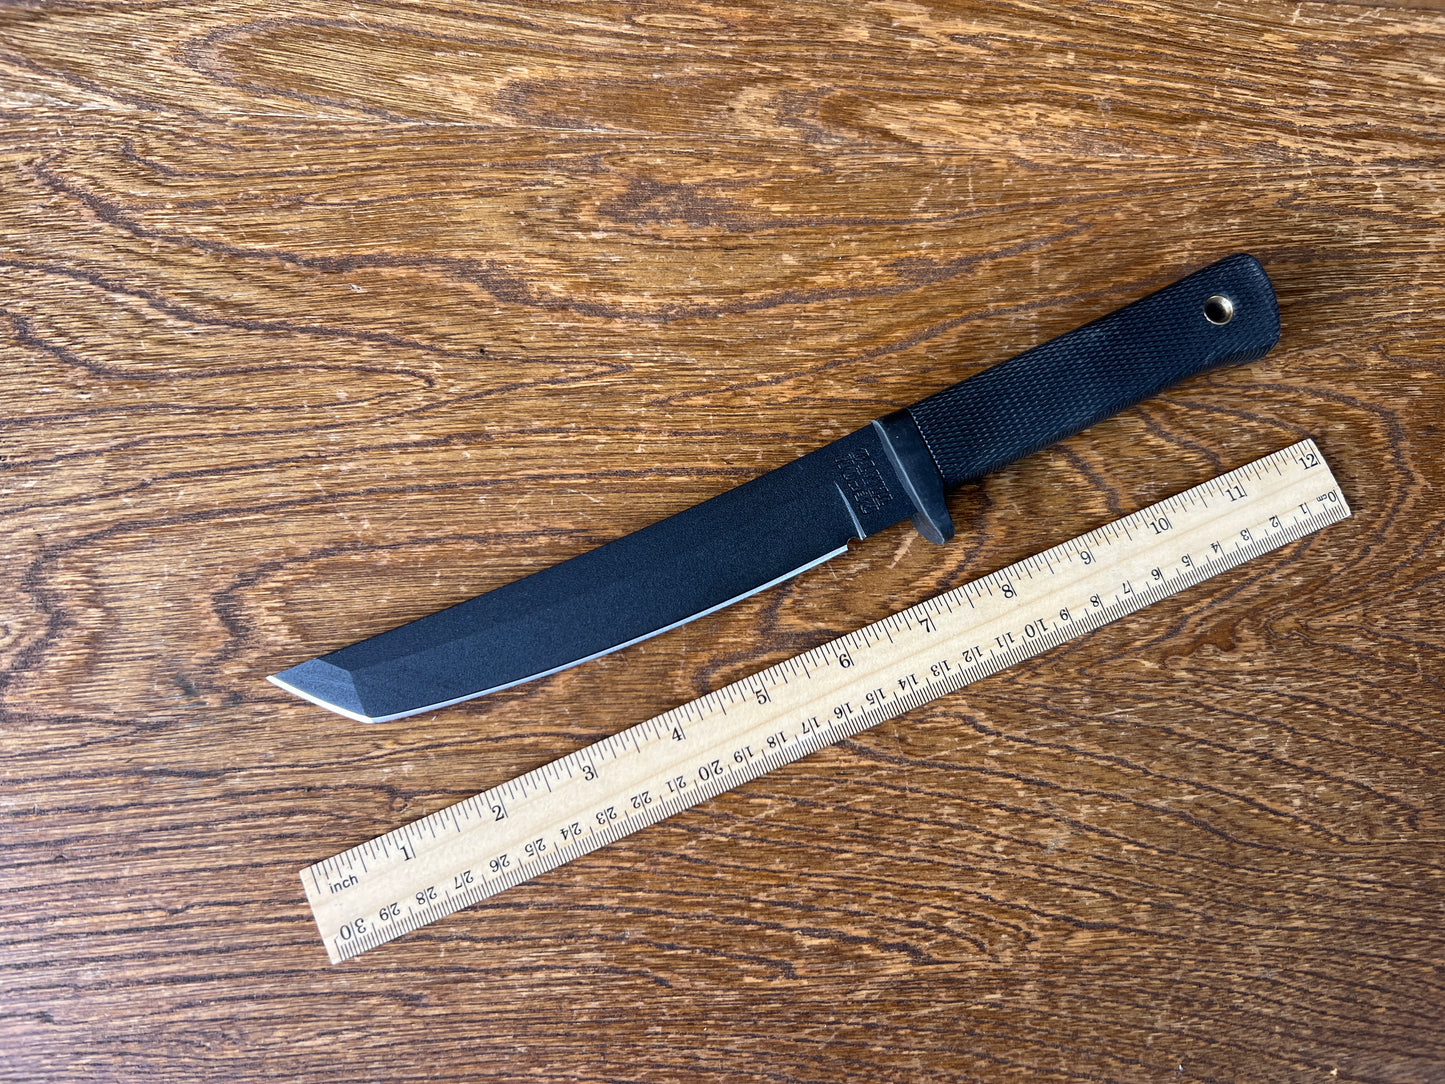 Very early Cold Steel recon ranto carbon V steel produced in the United States